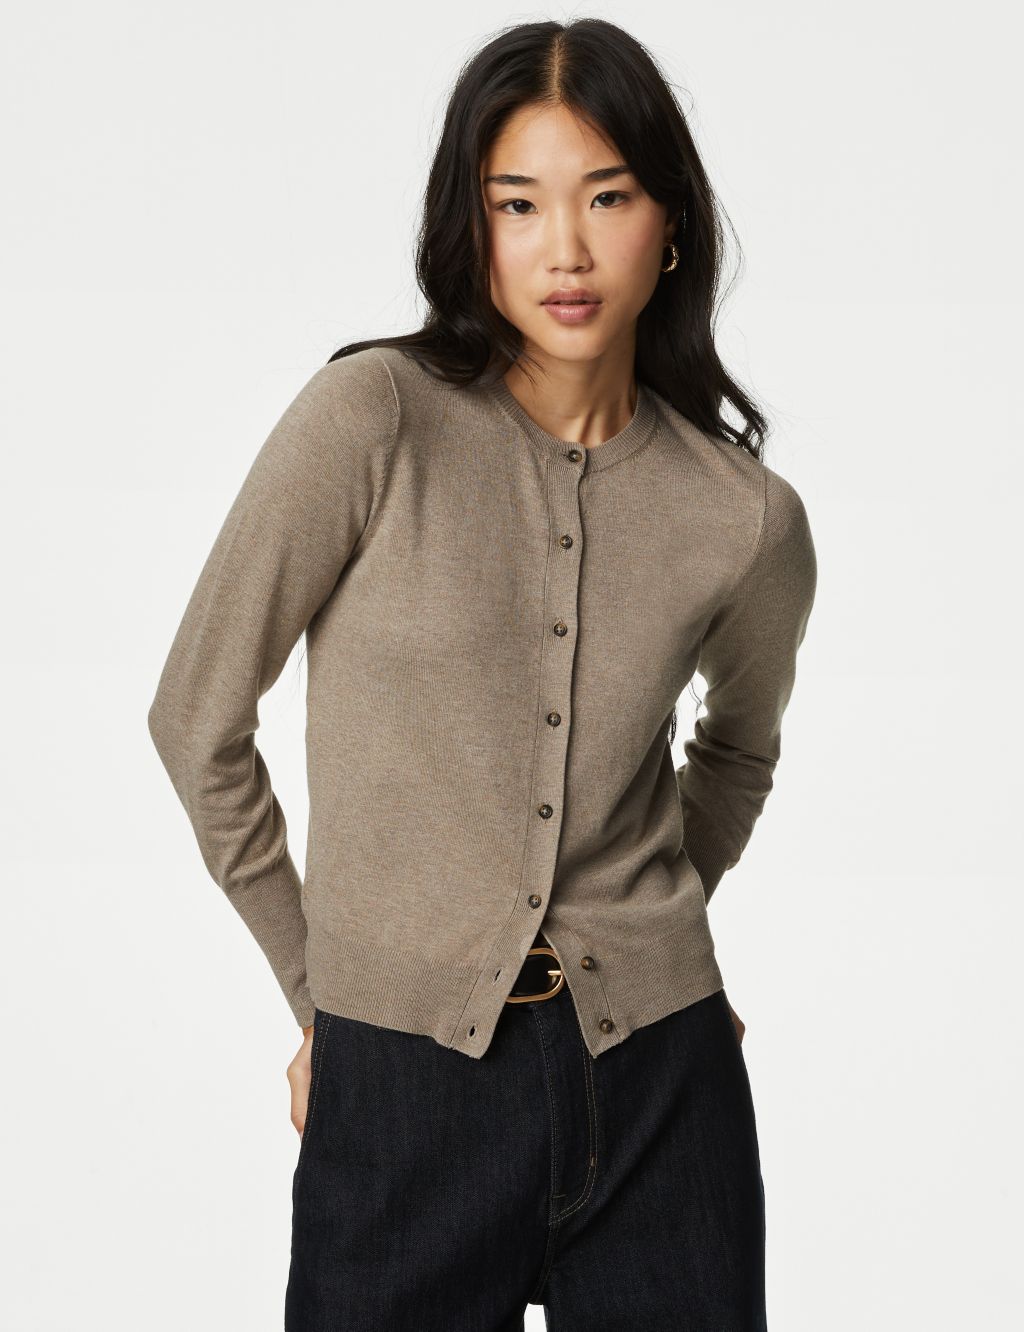 Crew Neck Button Front Cardigan image 1